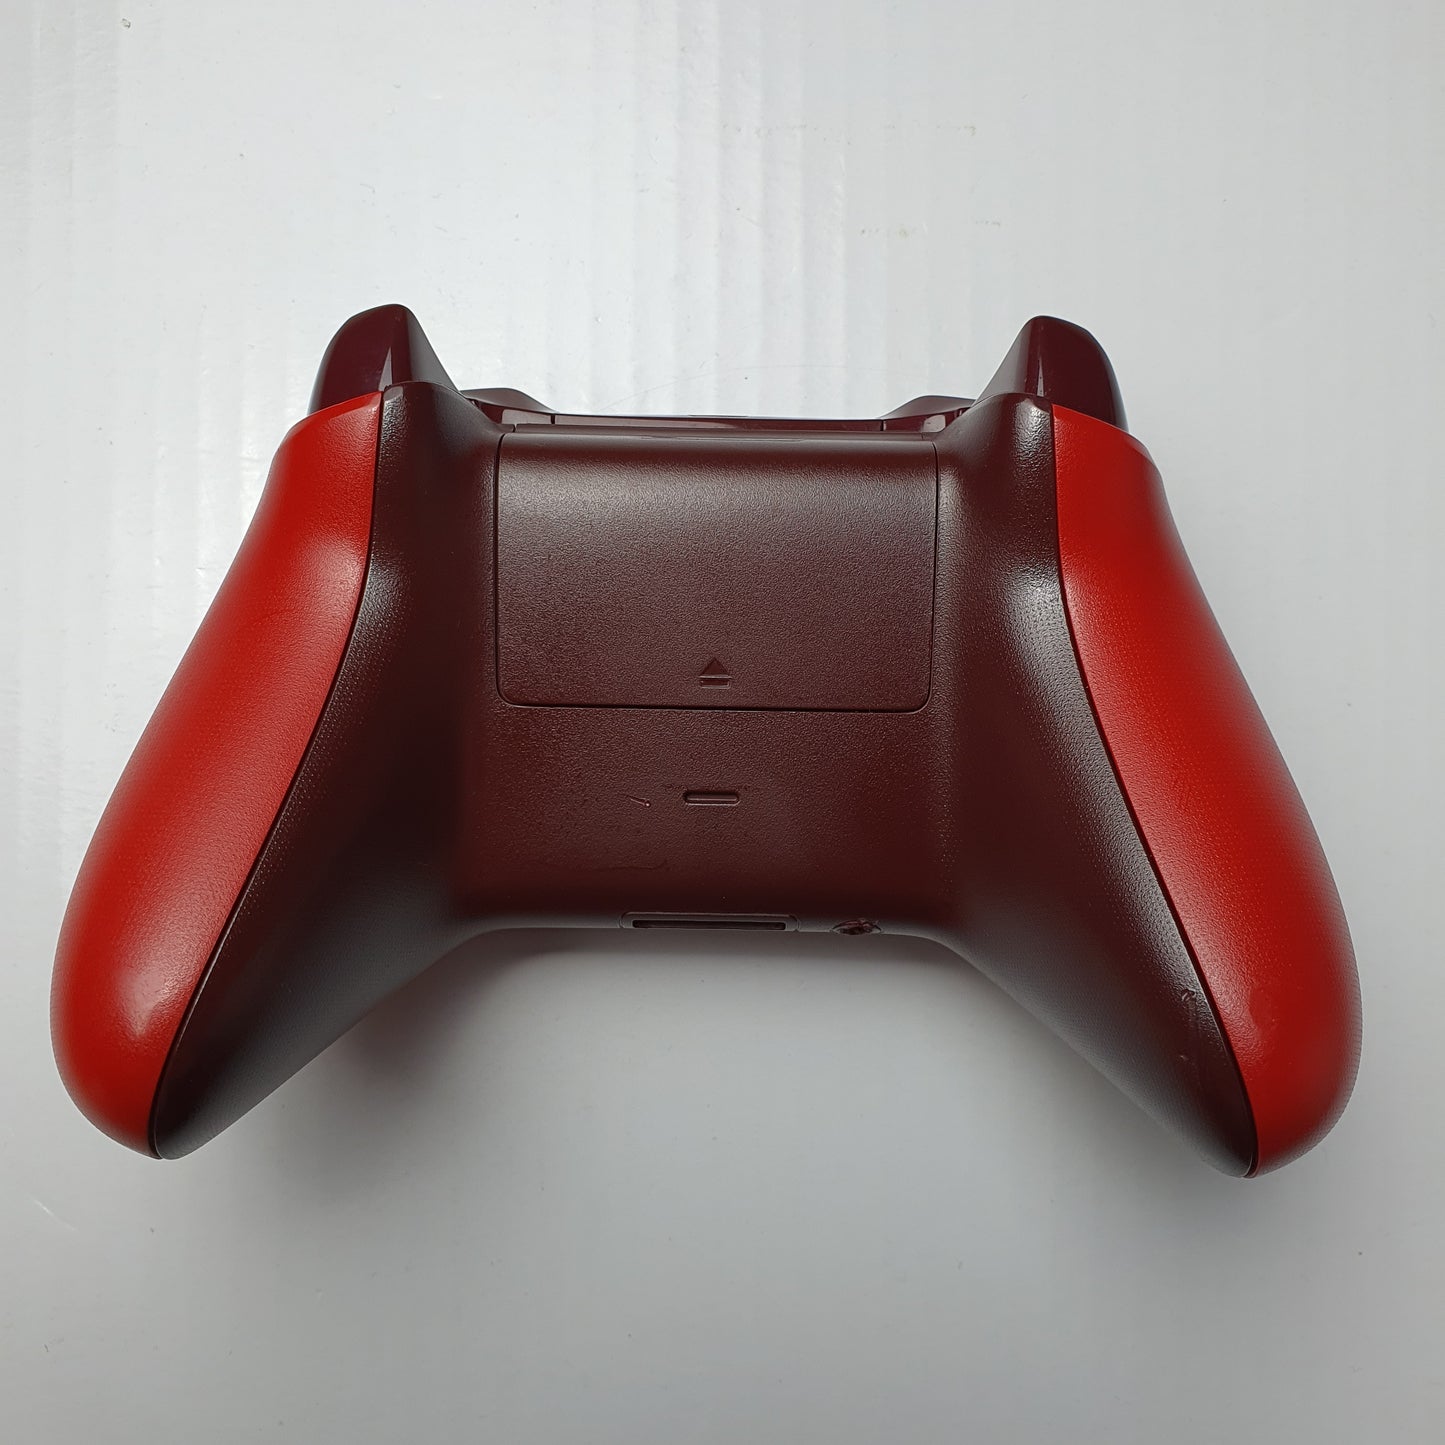 Official Microsoft Xbox Wireless Bluetooth Controller Red 1708